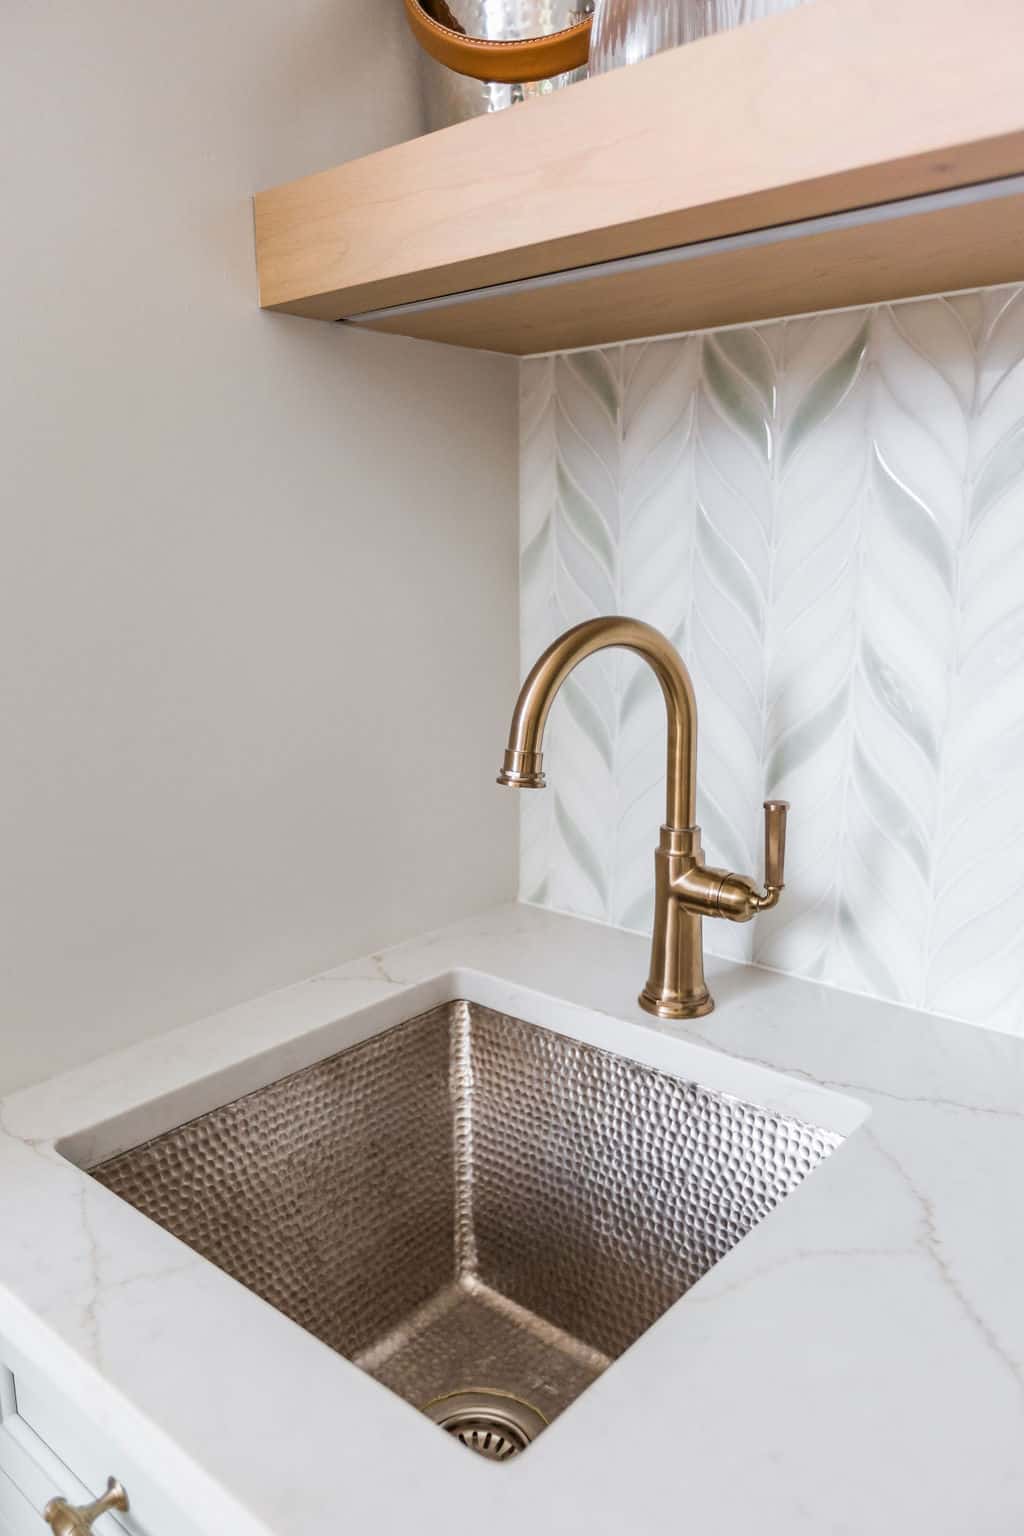 Nicholas Design Build | Modern kitchen sink with a hammered metal basin, white marble countertop, and a bronze faucet against a tiled backsplash with leaf pattern.